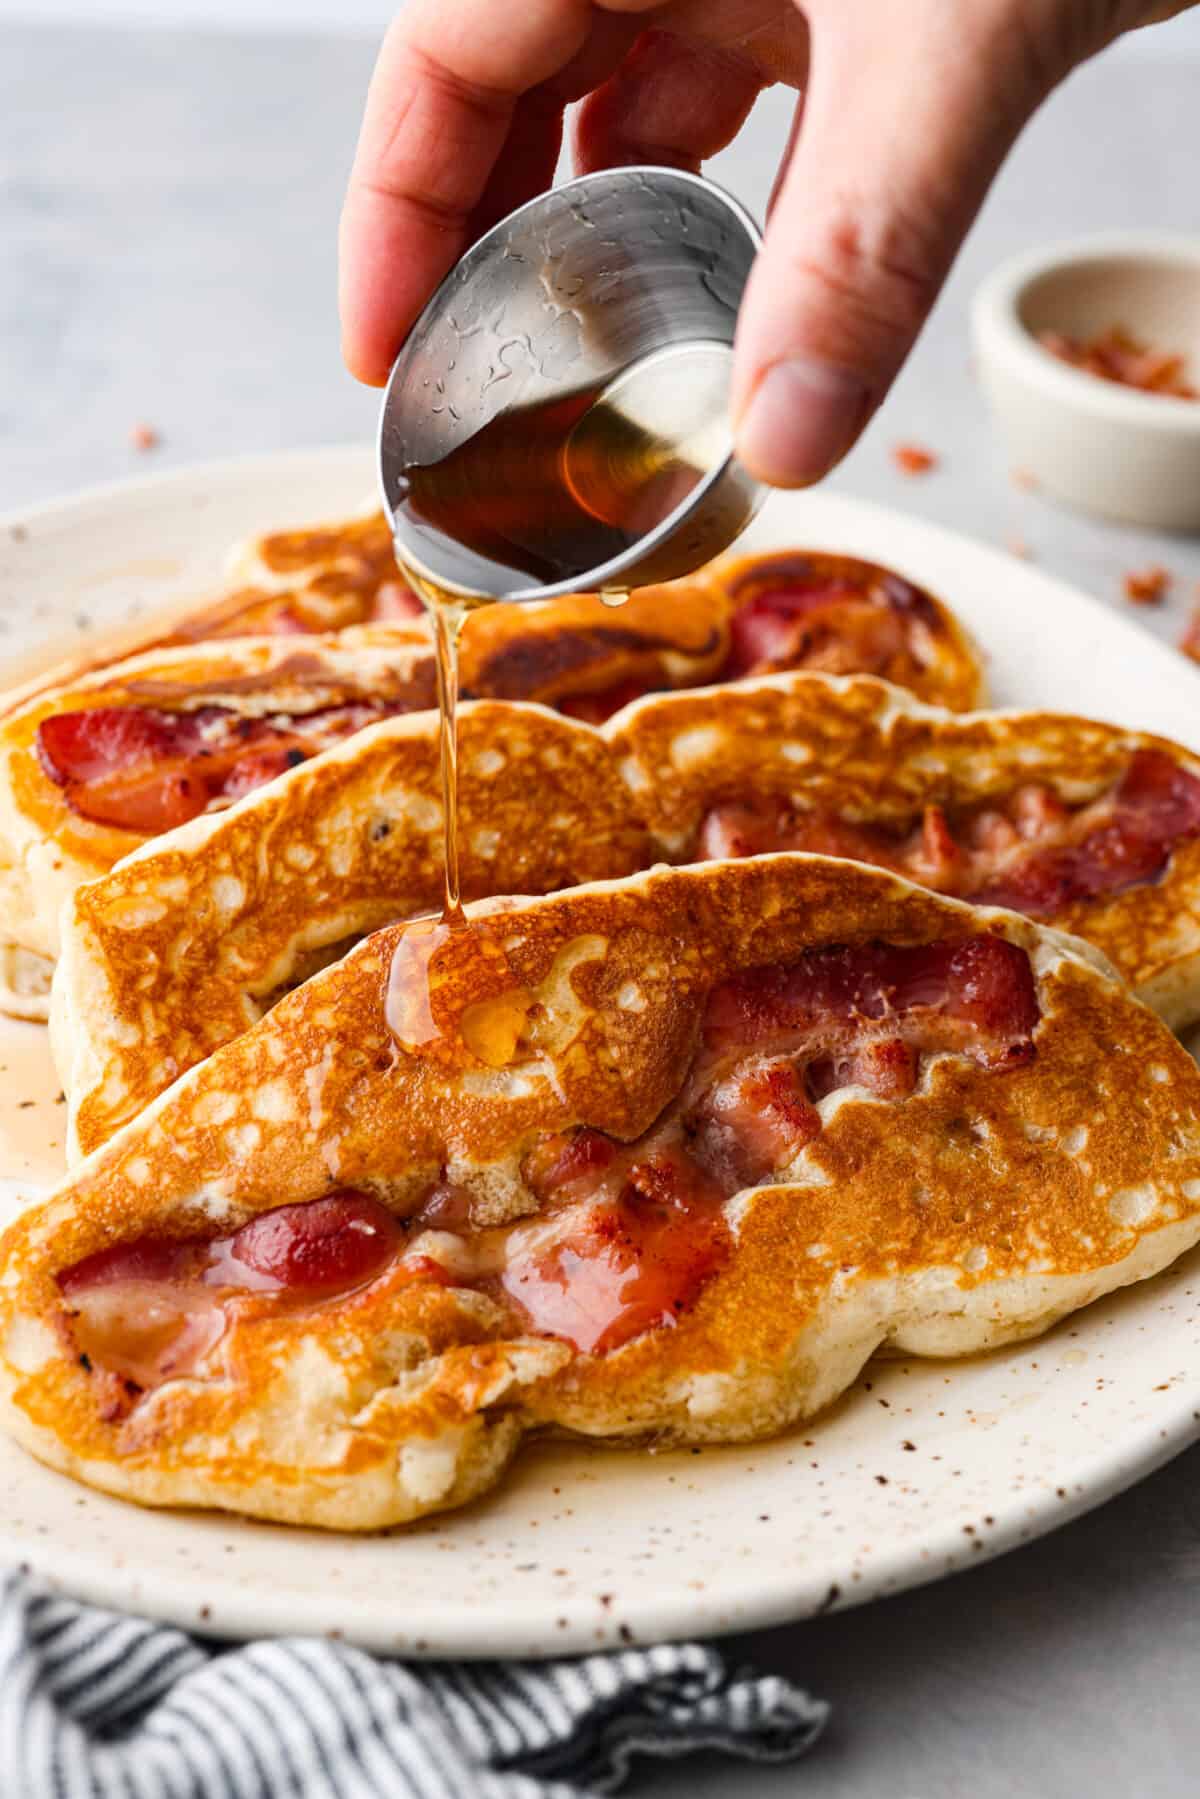 Pouring maple syrup over bacon pancakes.